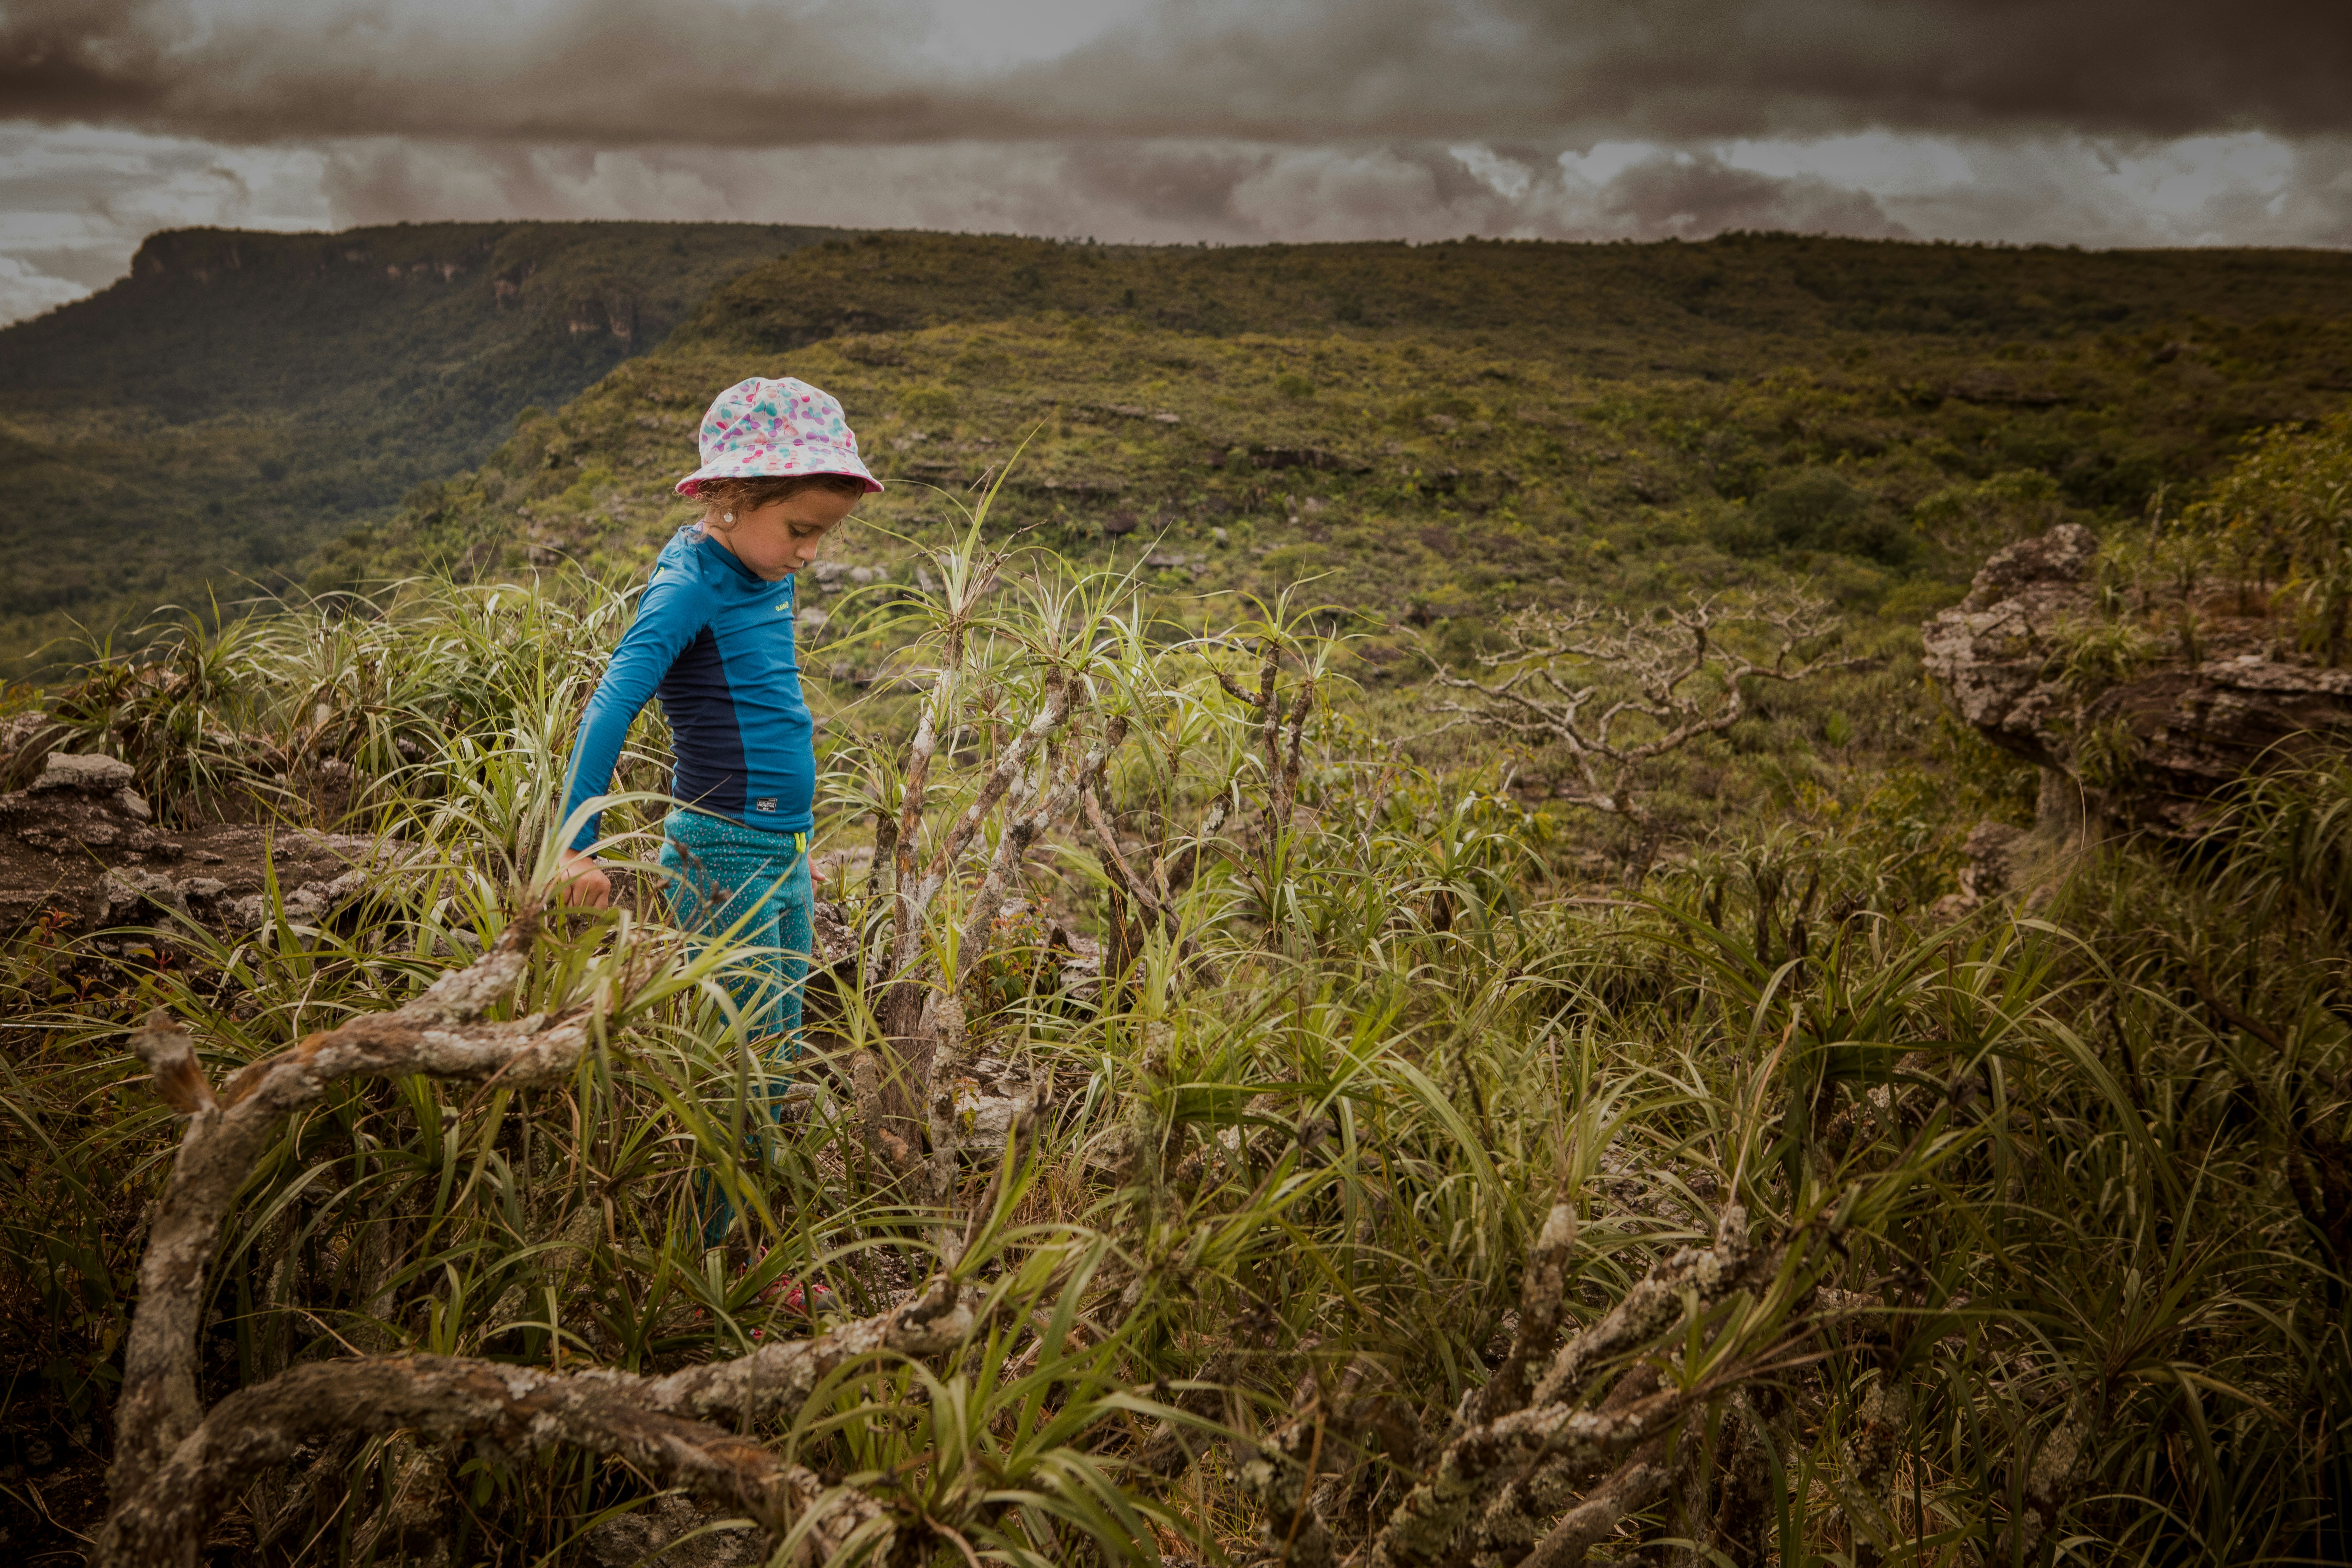 A little girl in a pink and white bucket hat and a blue rash guard stares down at the ground in front of her as she stands amidst the thick vegetation near Cano Cristales in Colombia